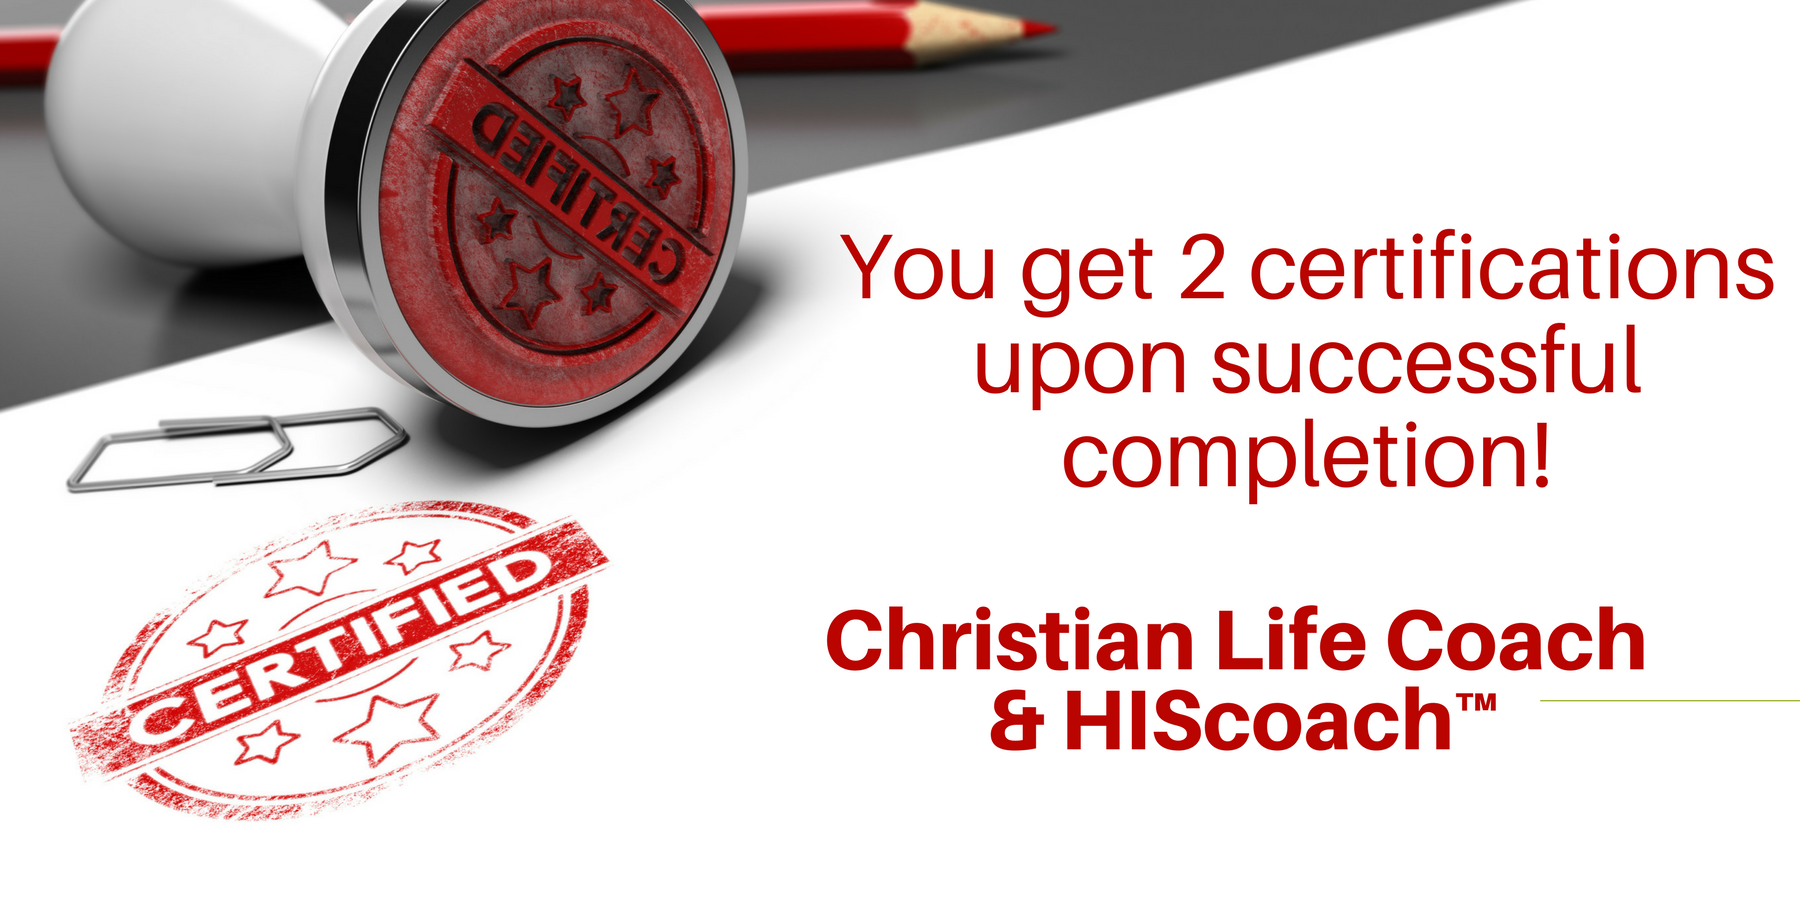 Certified Become a certified christian life coach (2) Christian Life